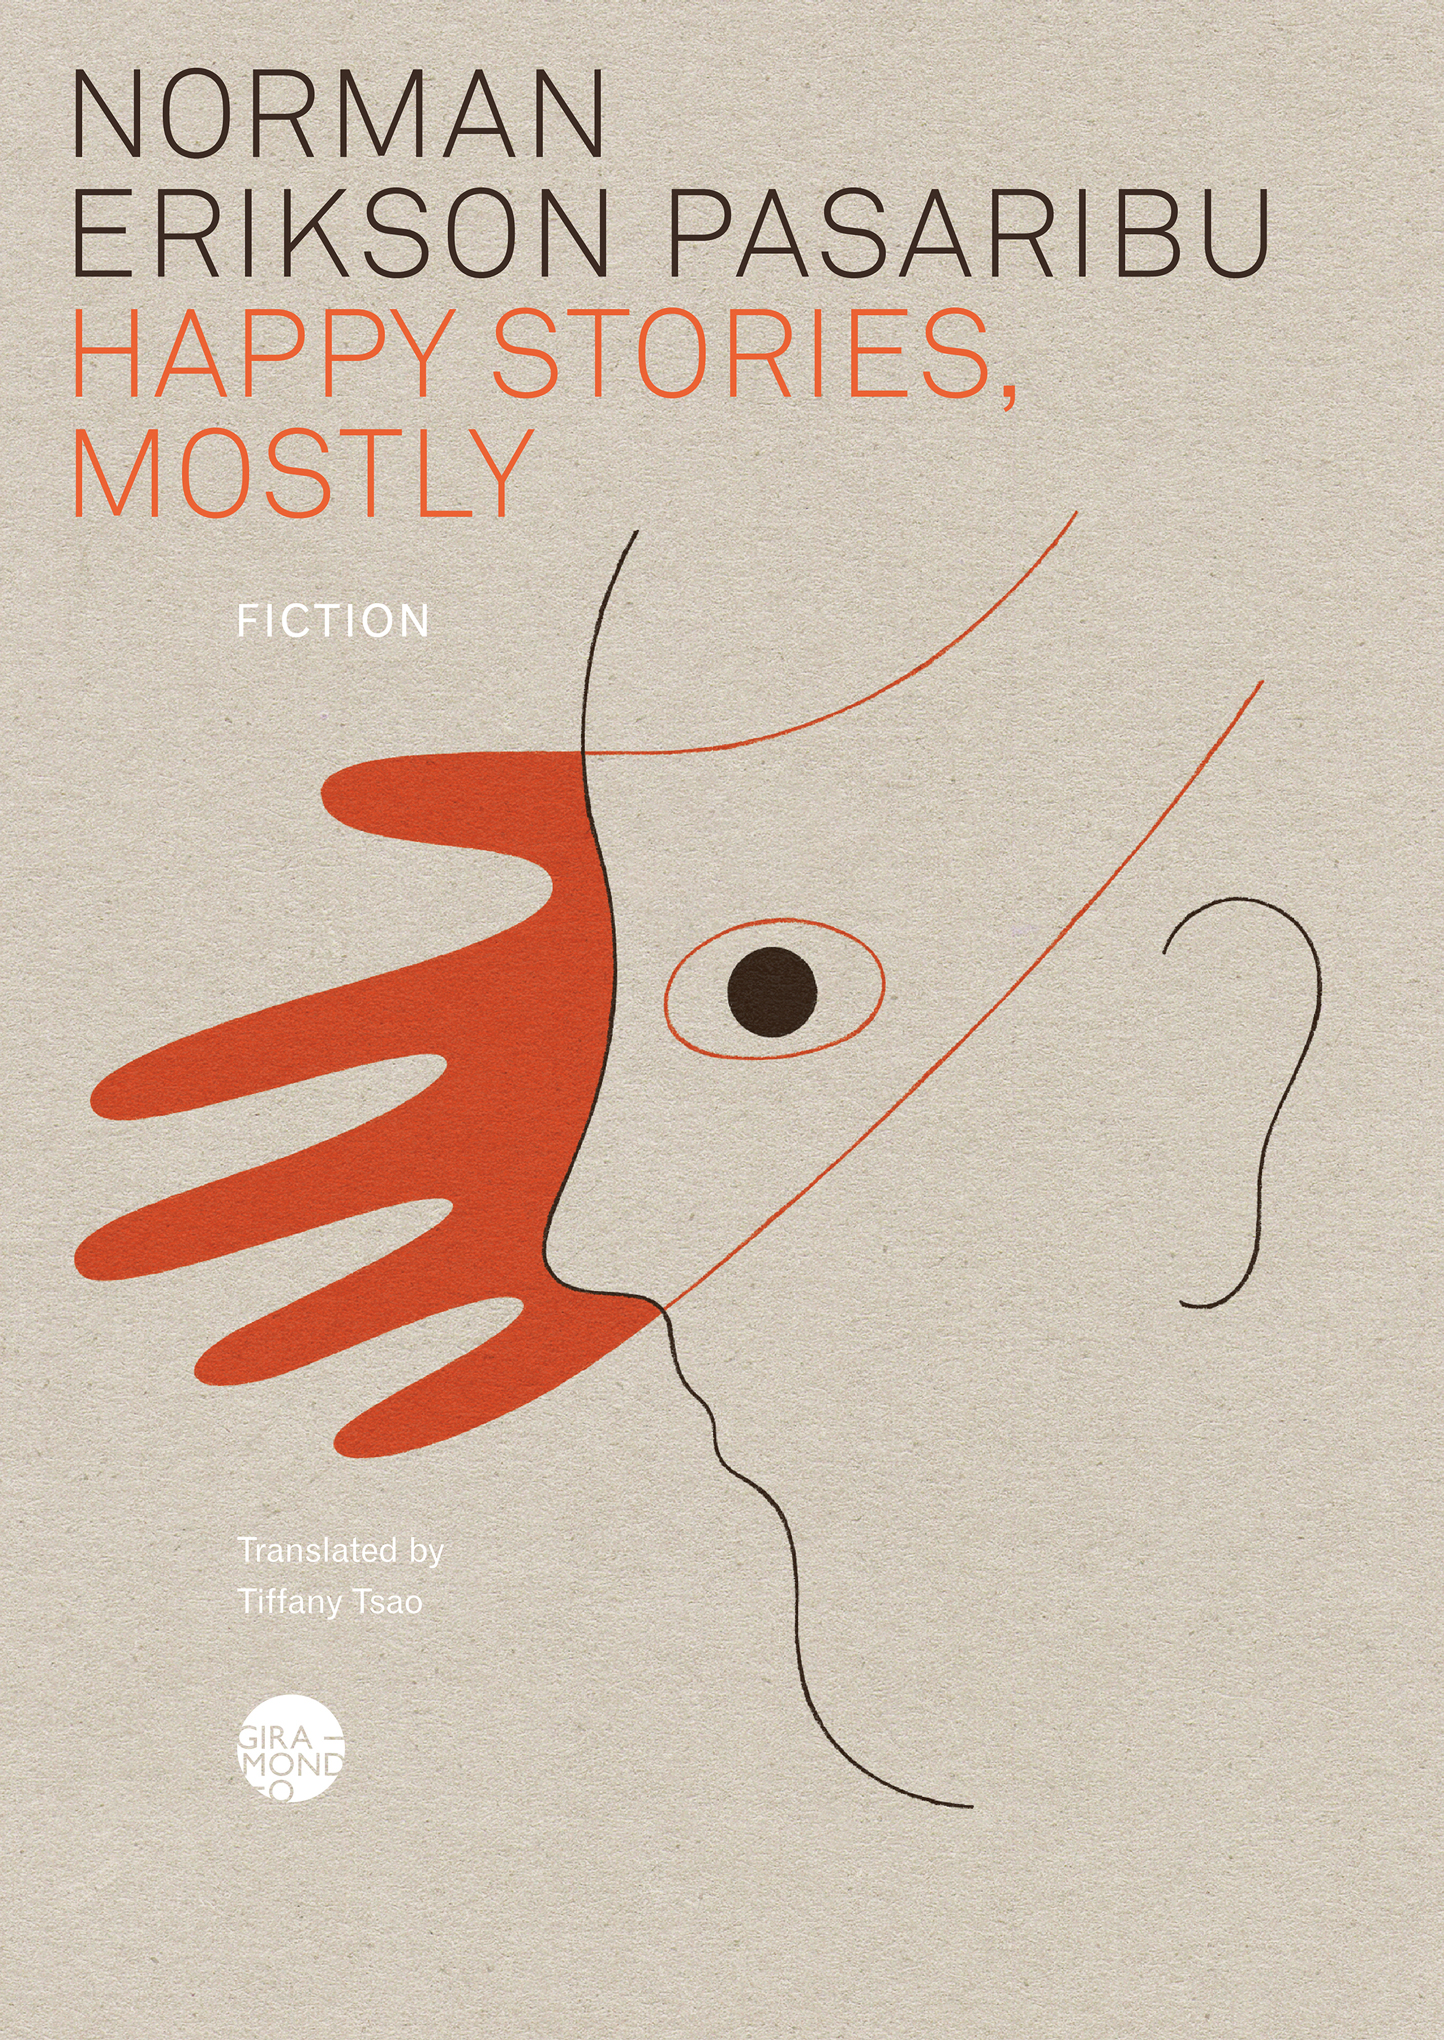 The cover of the book Happy Stories, Mostly featuring an abstract line drawing of a face and hand.